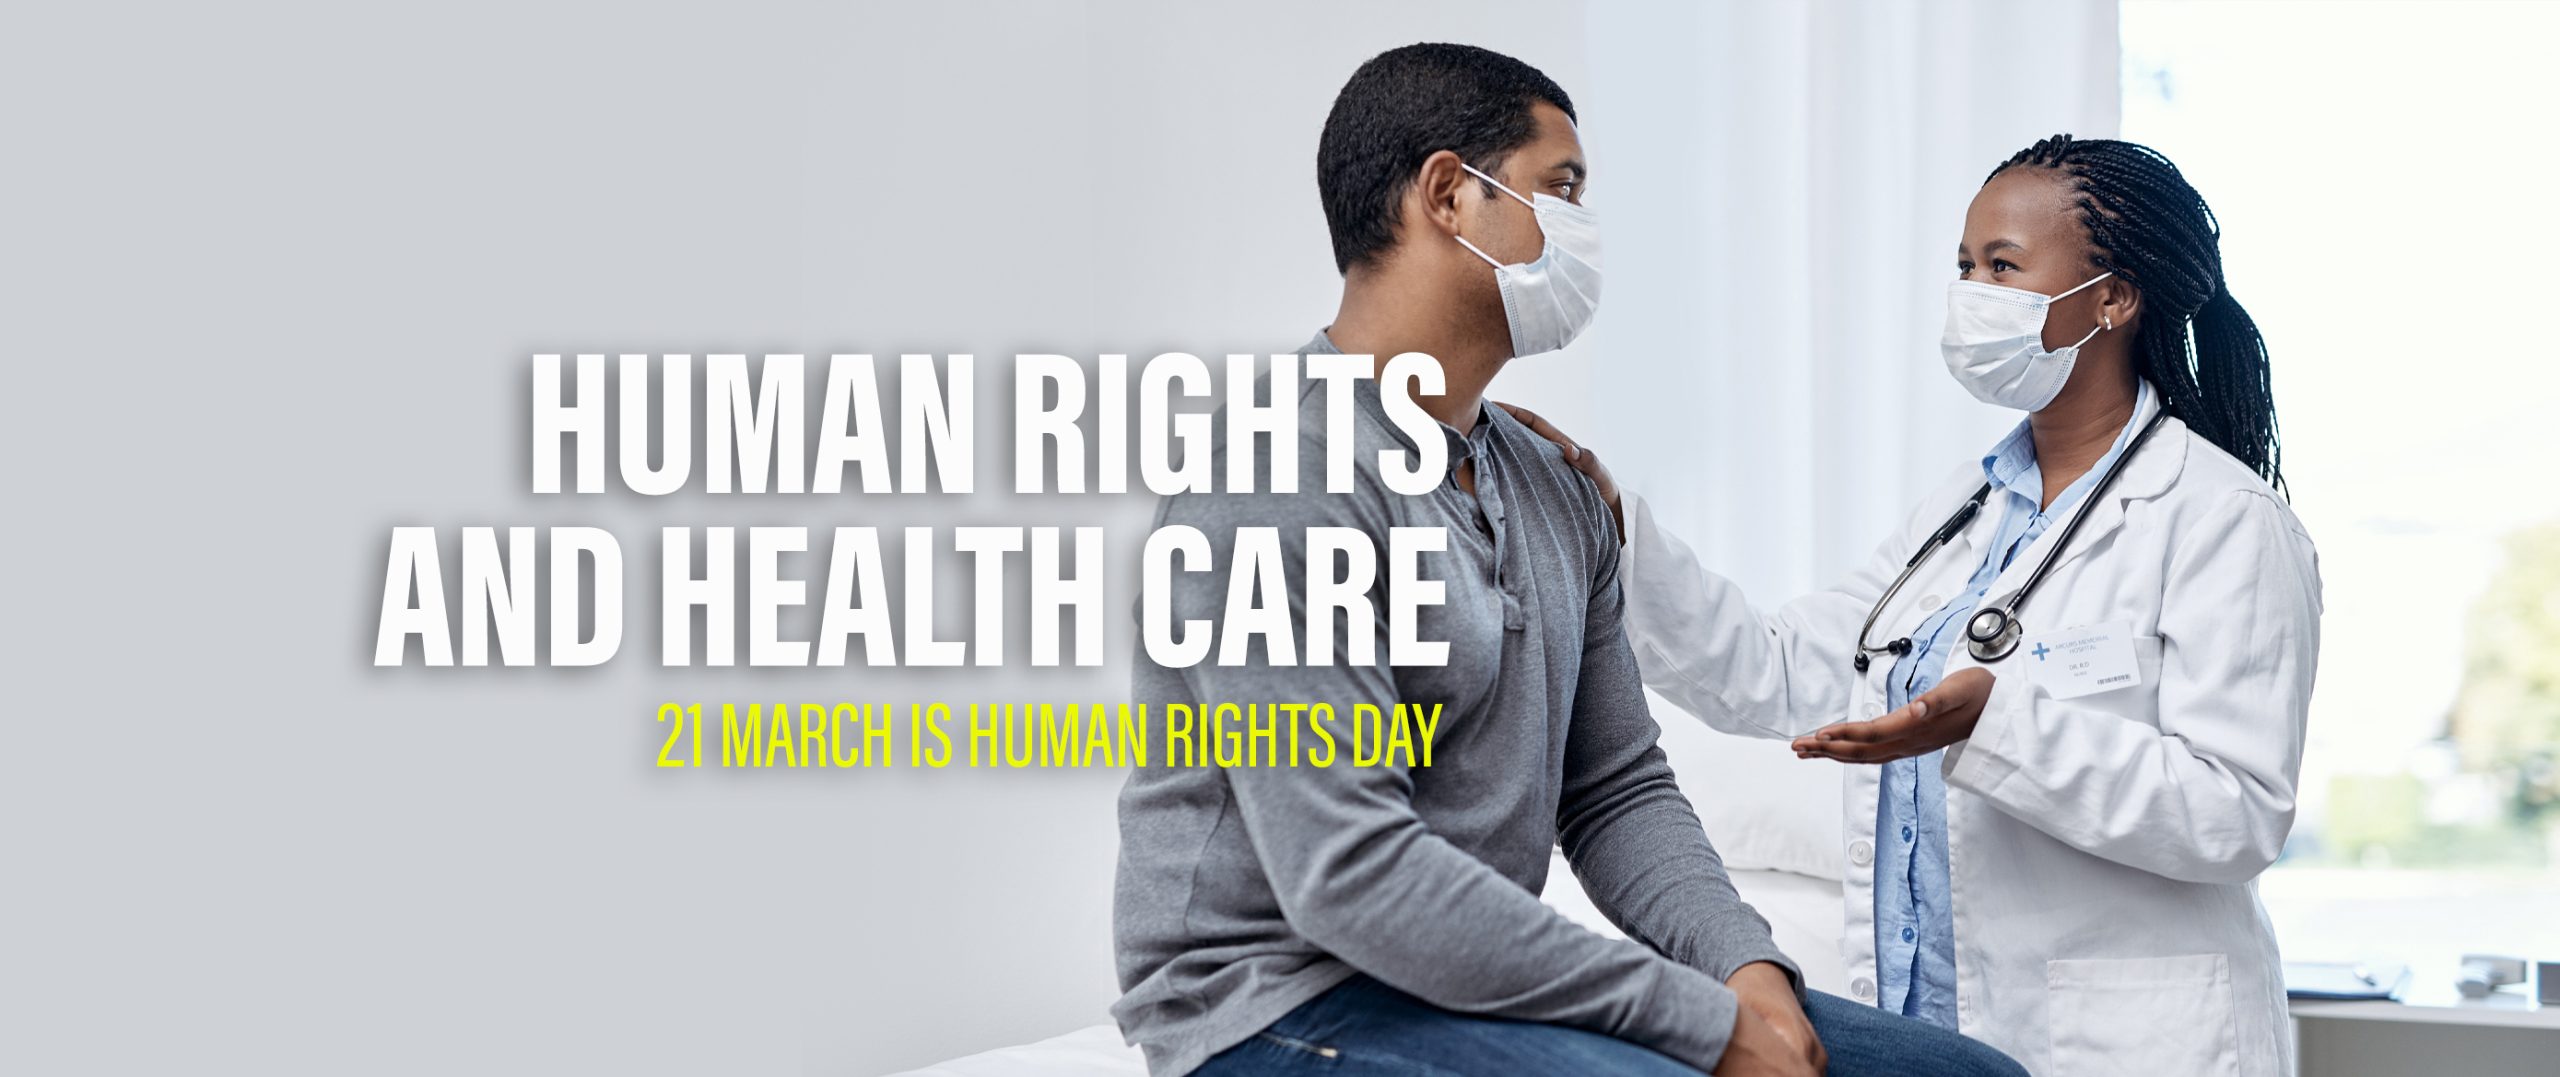 Human Rights And Health Care